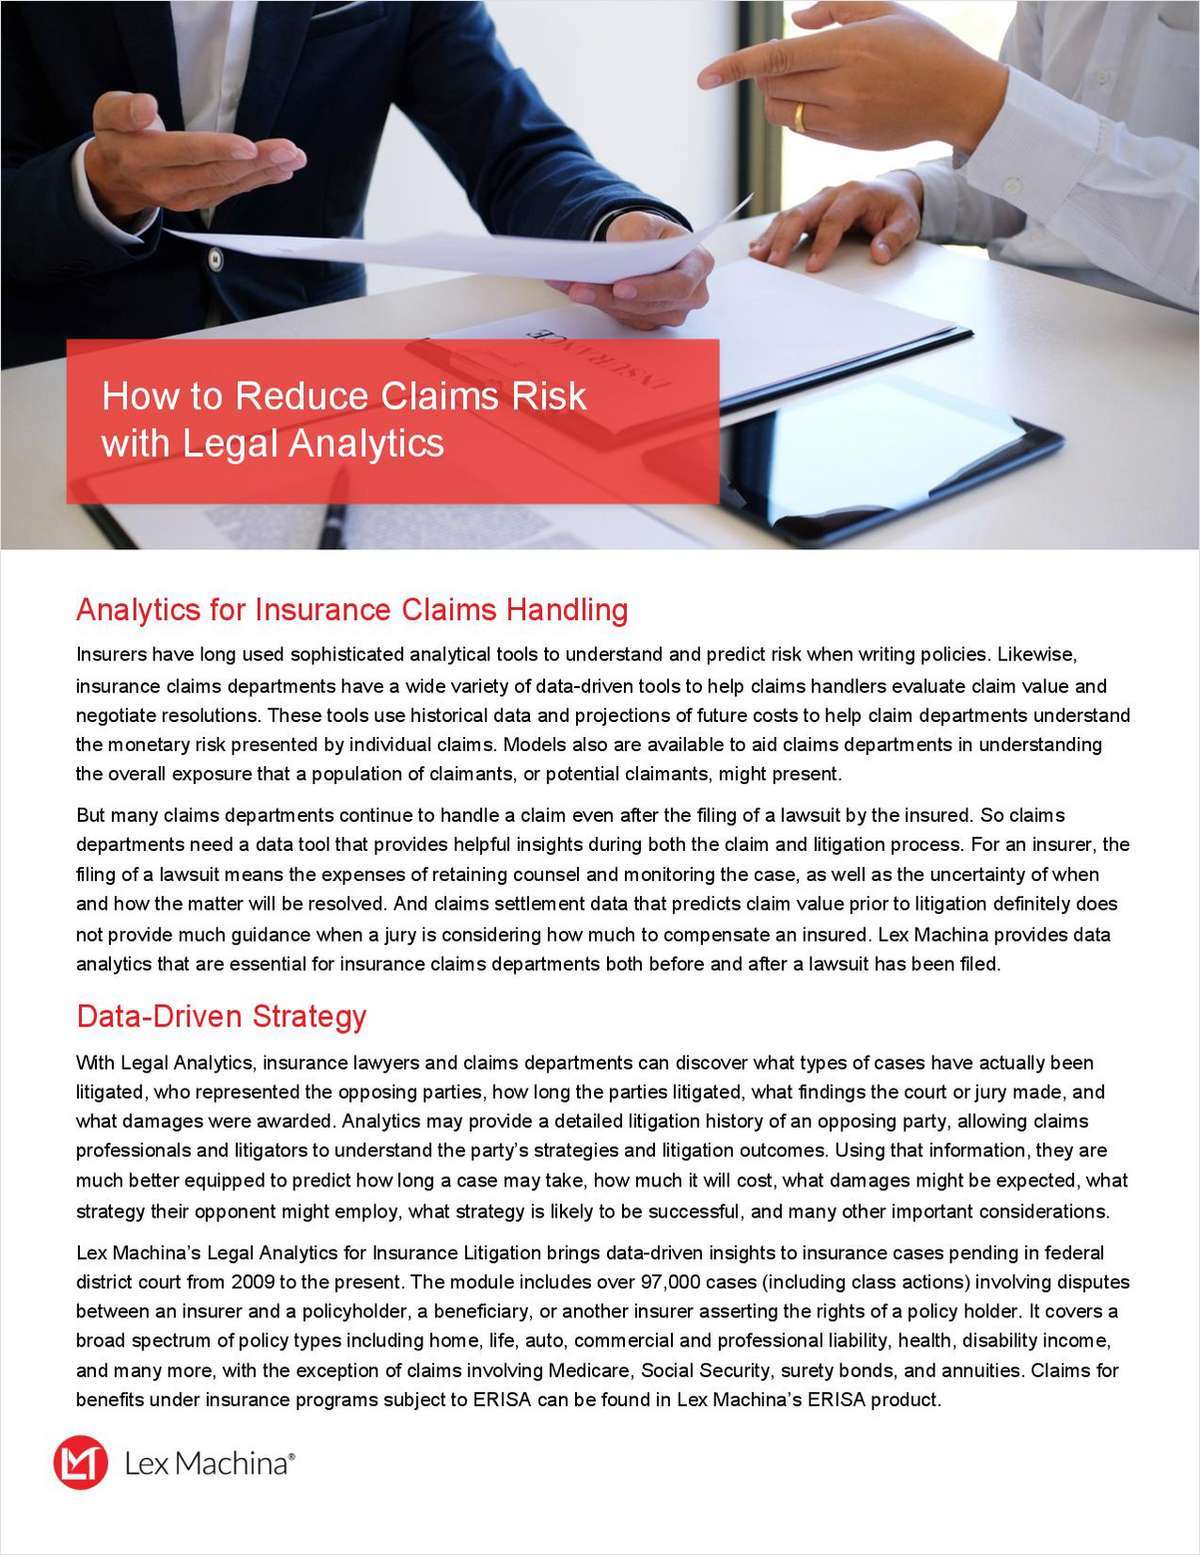 How to Reduce Claims Risk with Legal Analytics